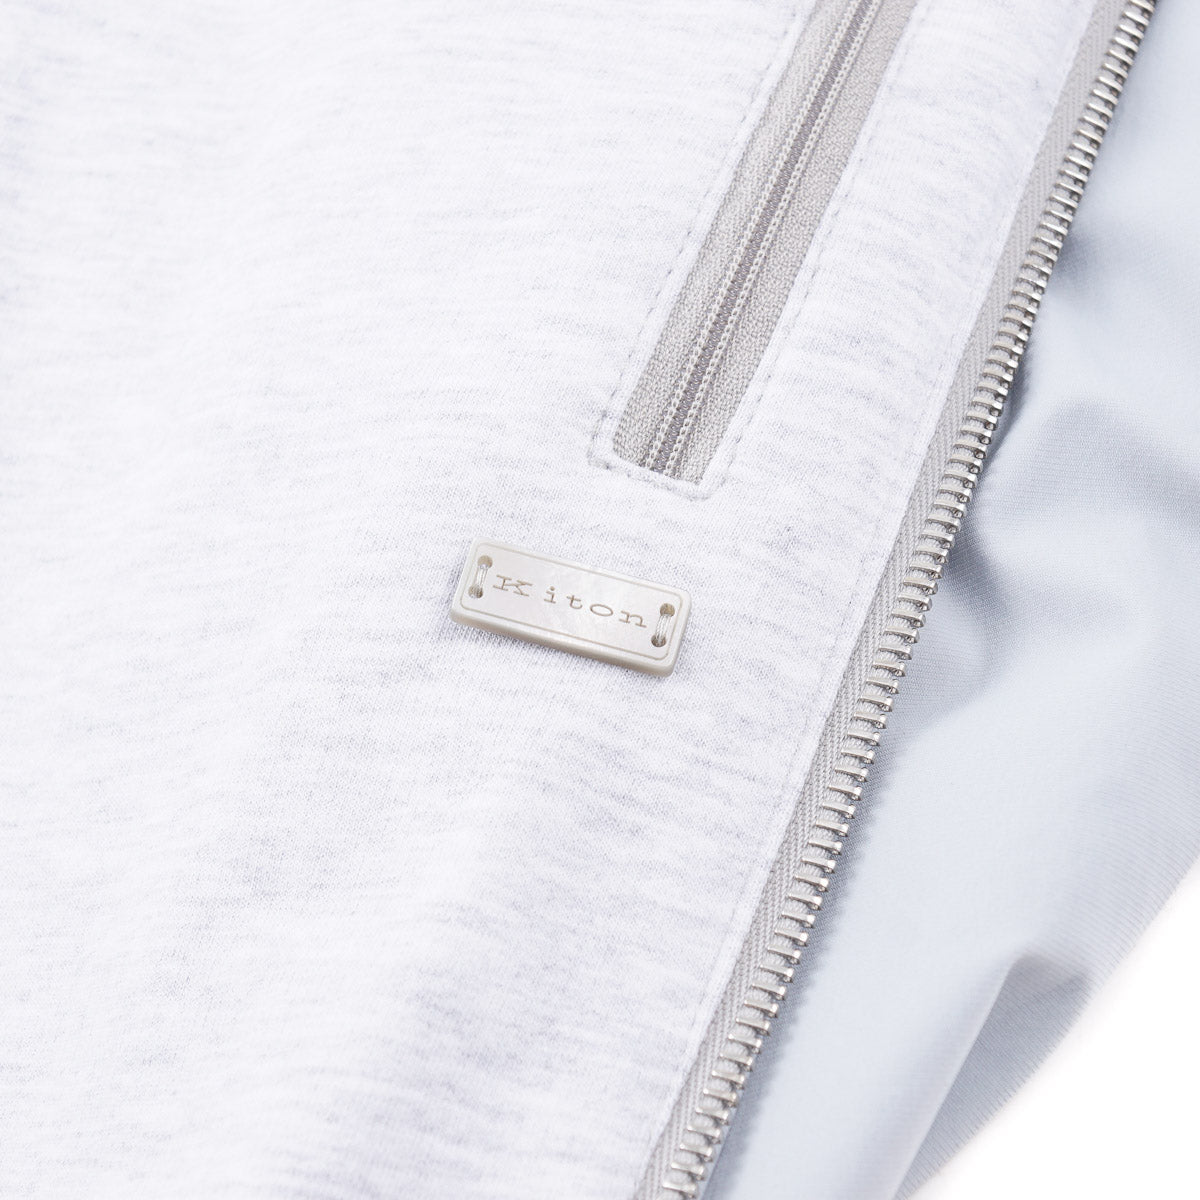 Kiton Hooded Jacket with Jersey Cotton Lining - Top Shelf Apparel